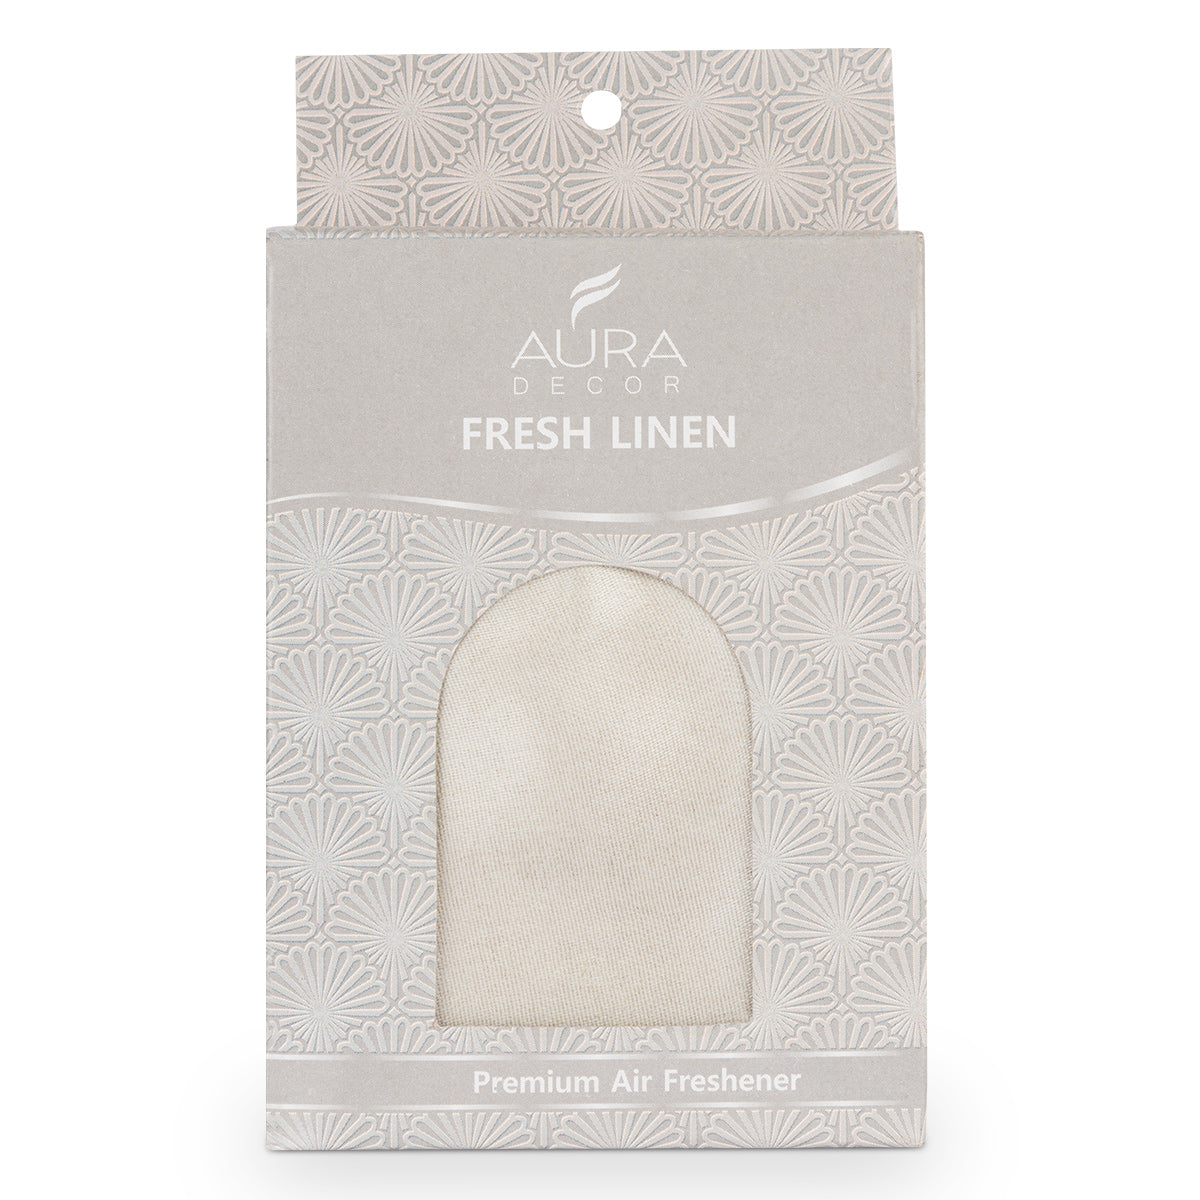 Air Perfume/Air Fresheners Pouch Bag for Office/Room/Car/Toilet and Wardrobe (Pouch Pack 40 gm) (Fresh Linen)